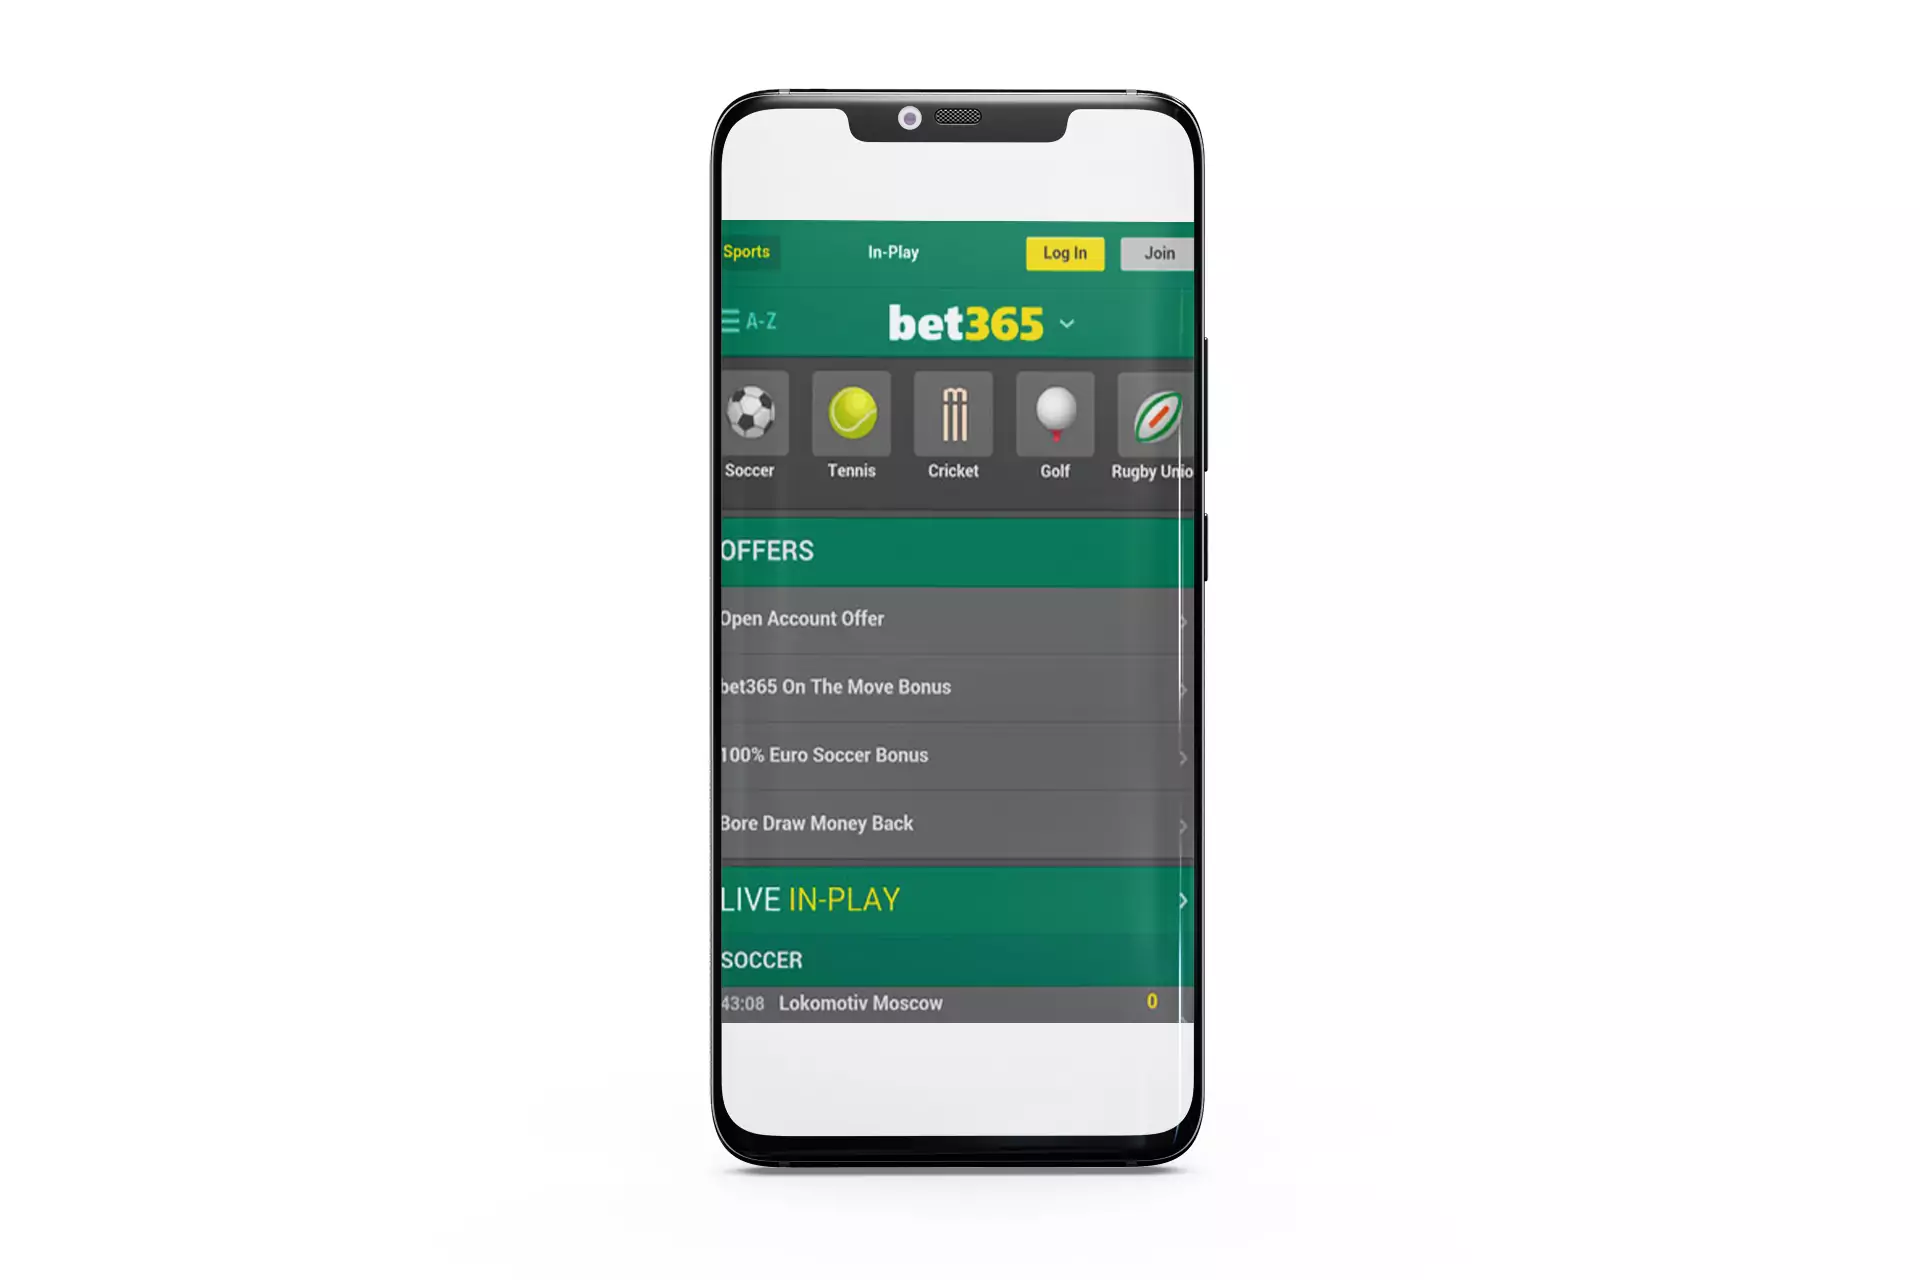 Install bet365 app on your iPhone and place bets on cricket whenever you want.